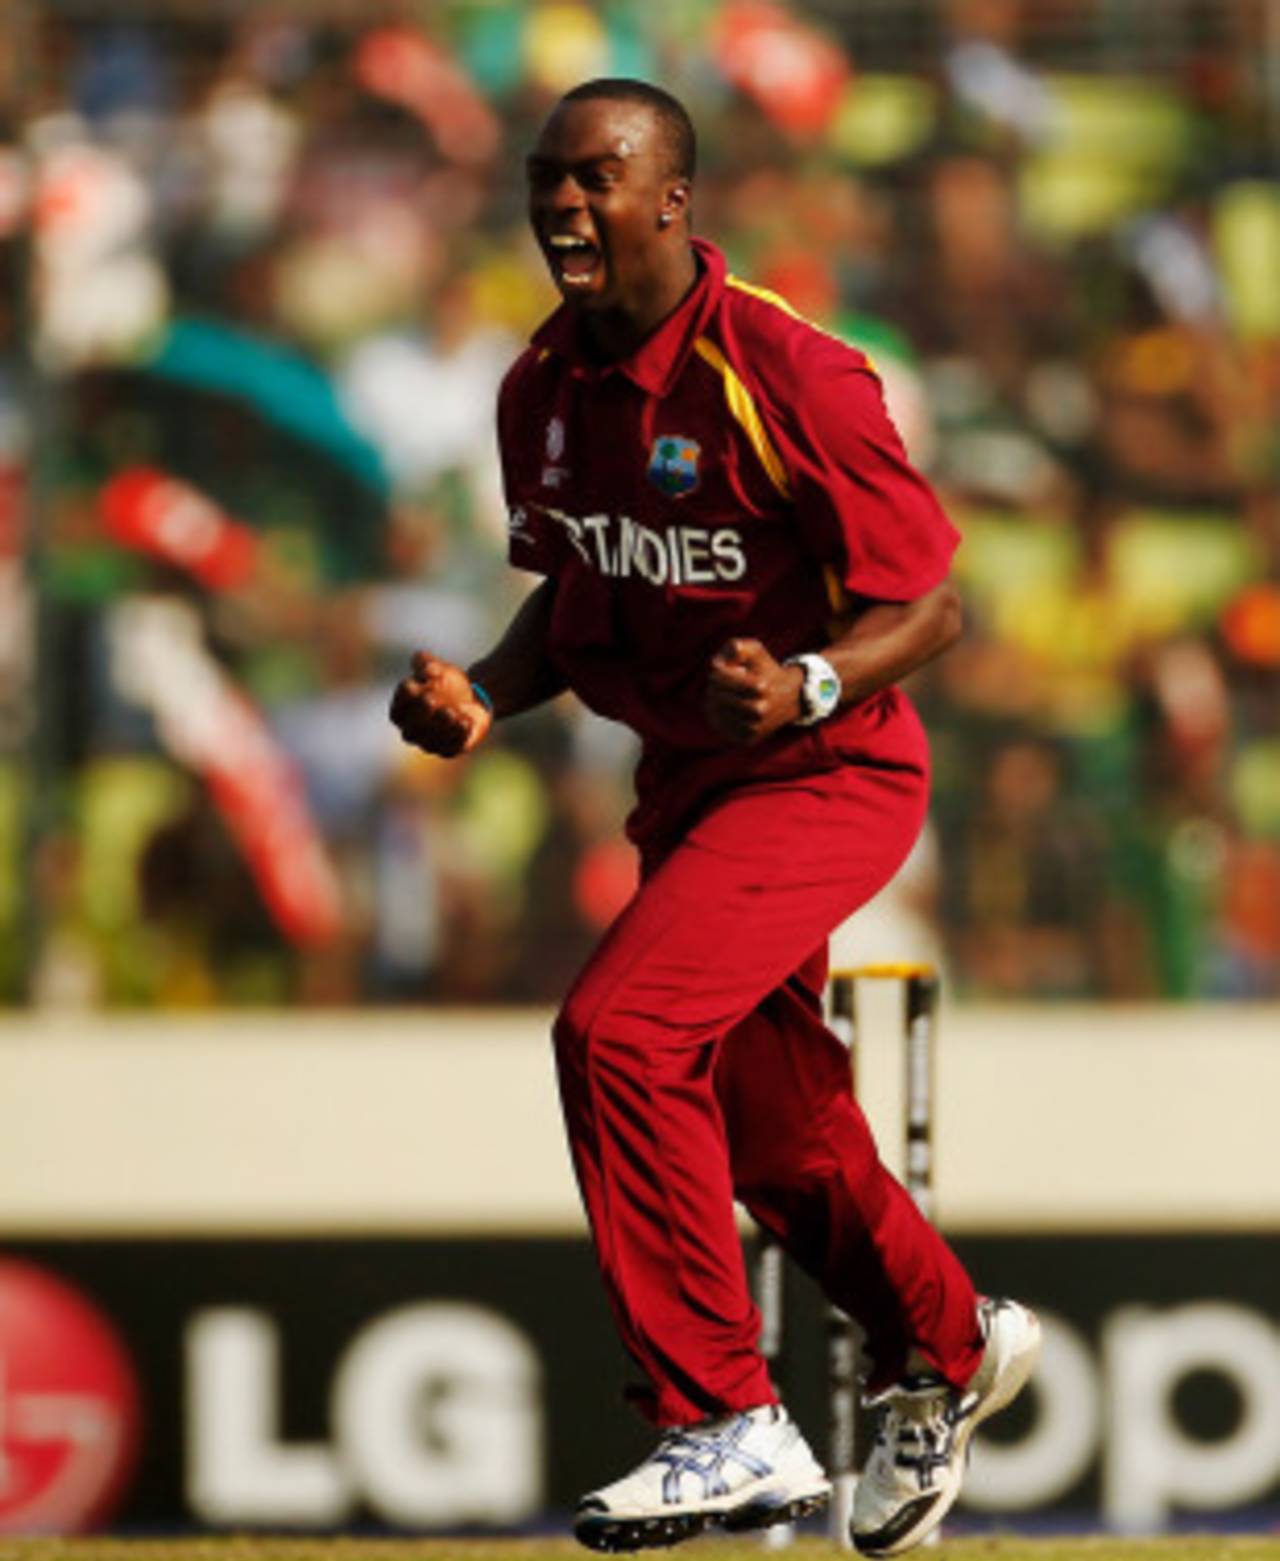 Kemar Roach roars after dismissing Mohammad Ashraful, Bangladesh v West Indies, Group B, World Cup 2011, Mirpur, March 4, 2011